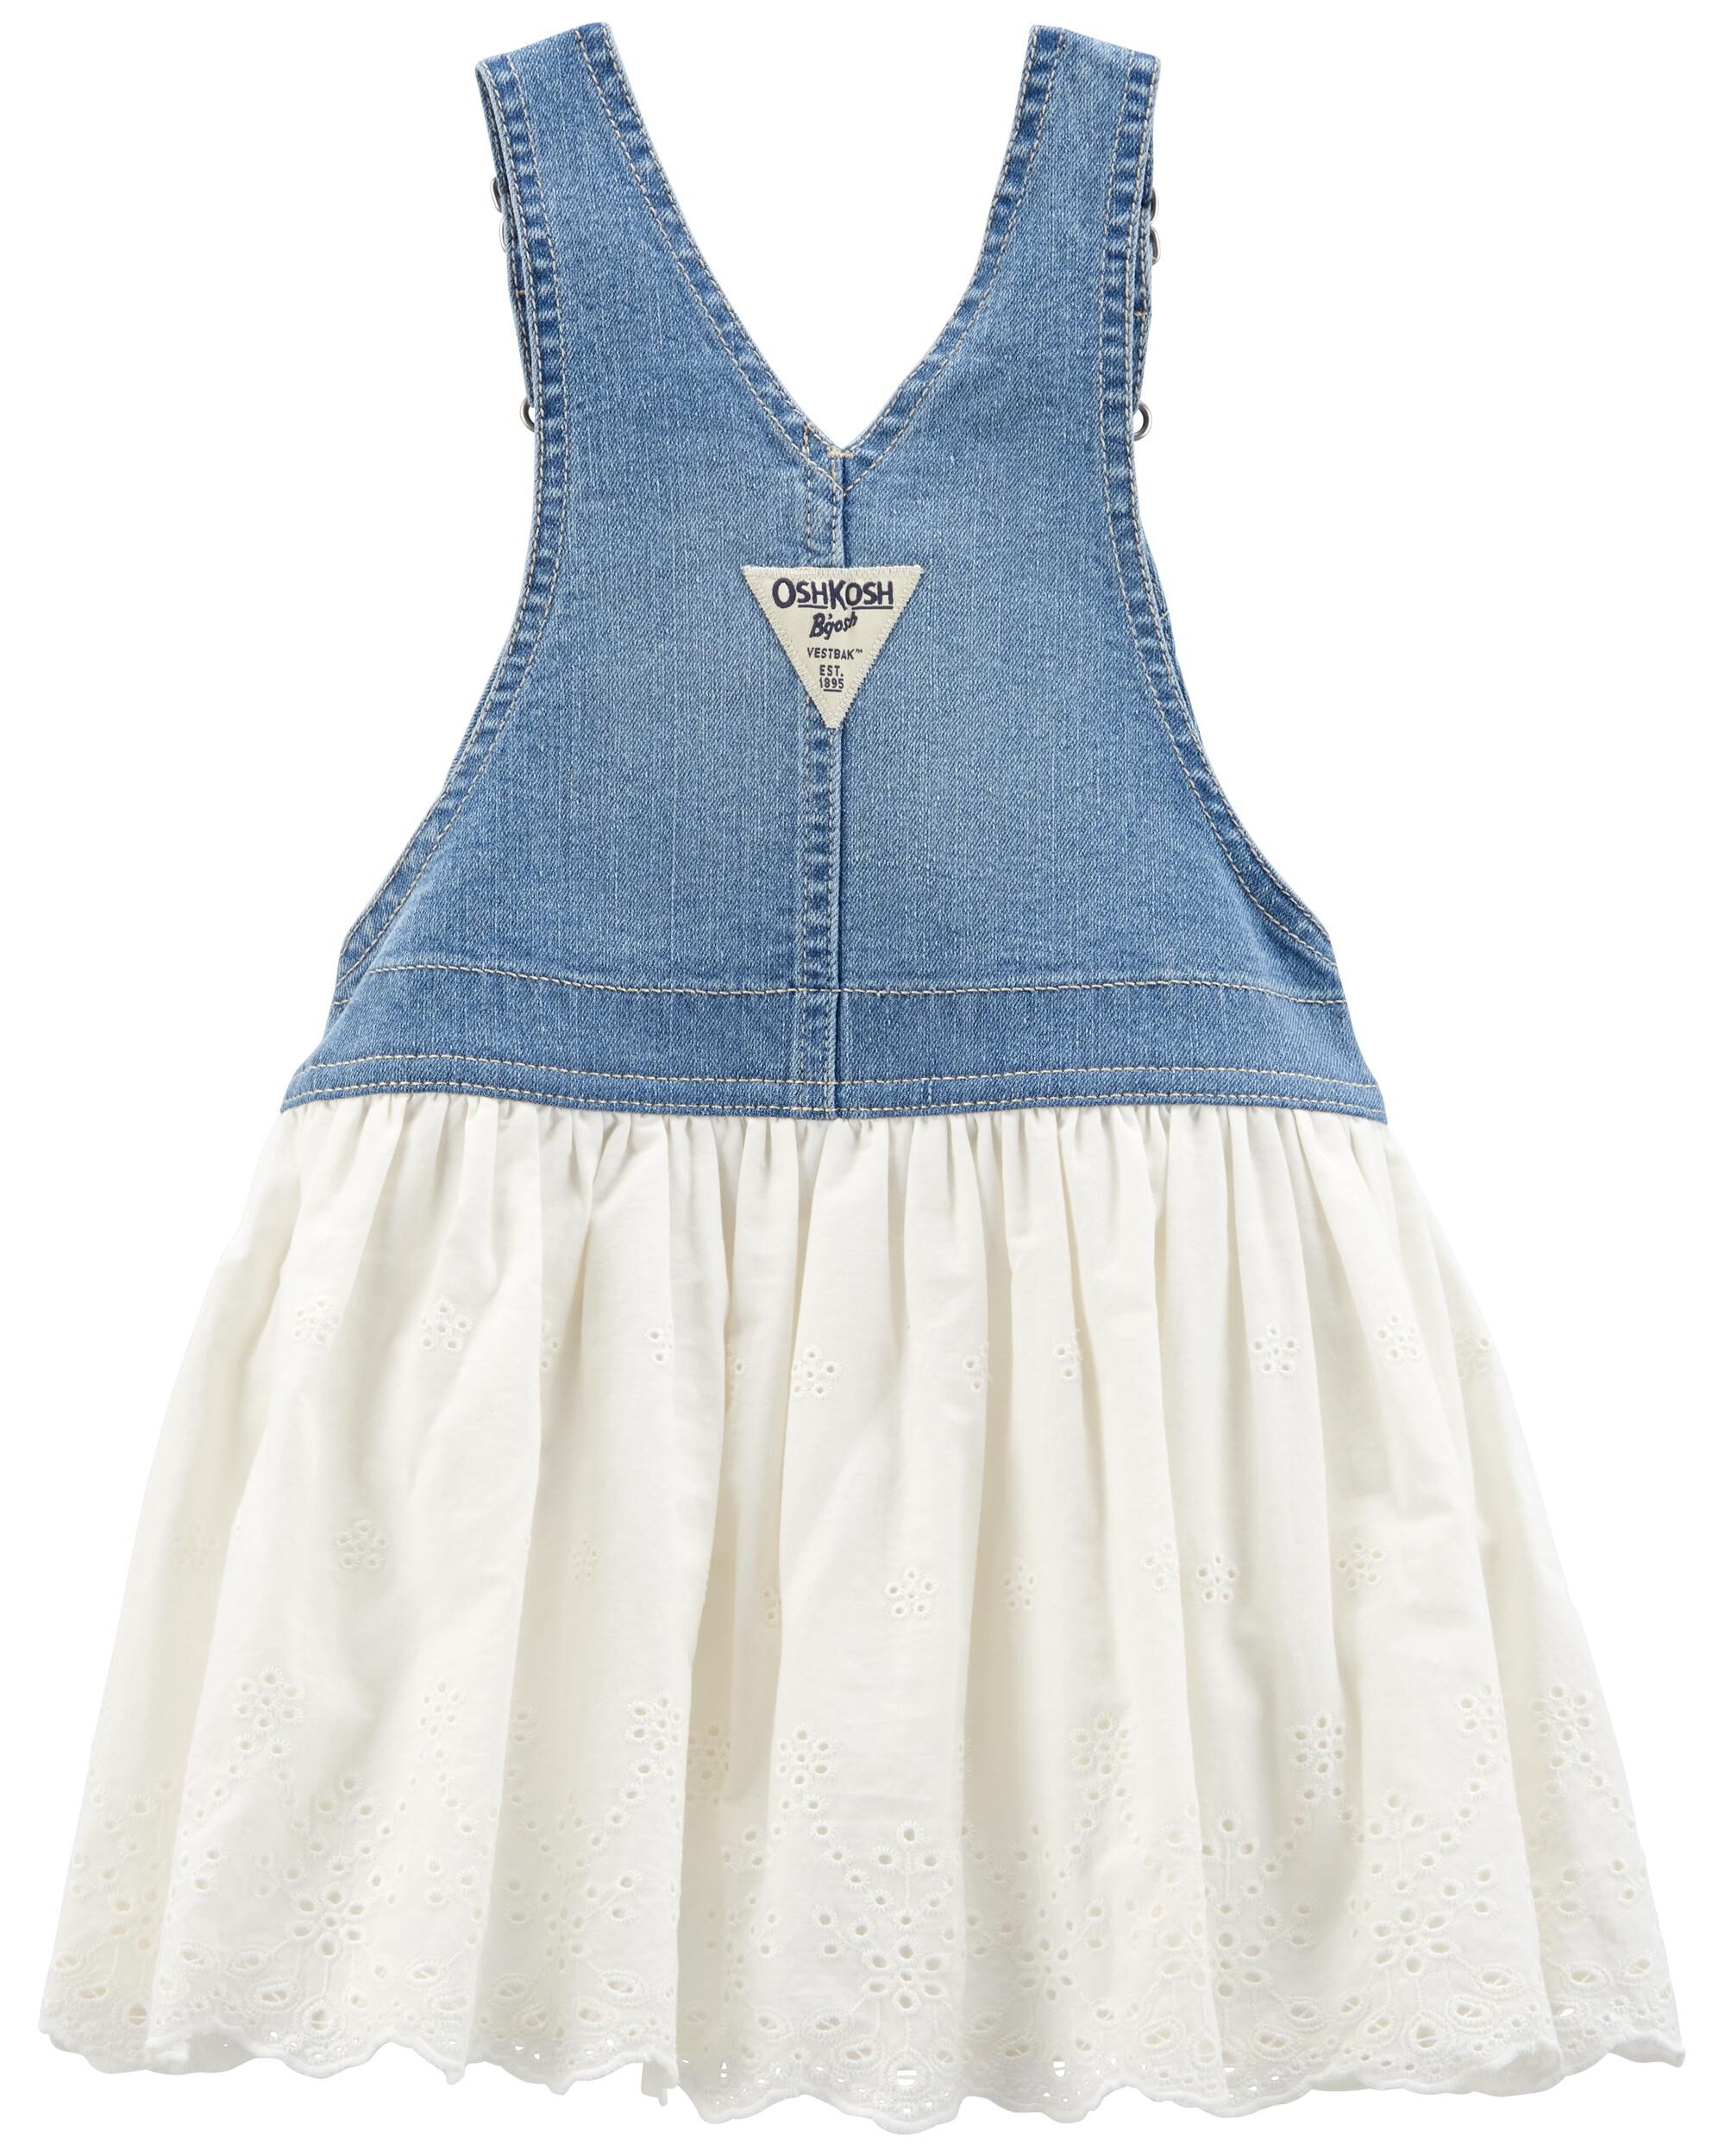 Shop All Toddler Girl: Overalls | Carter's | Free Shipping